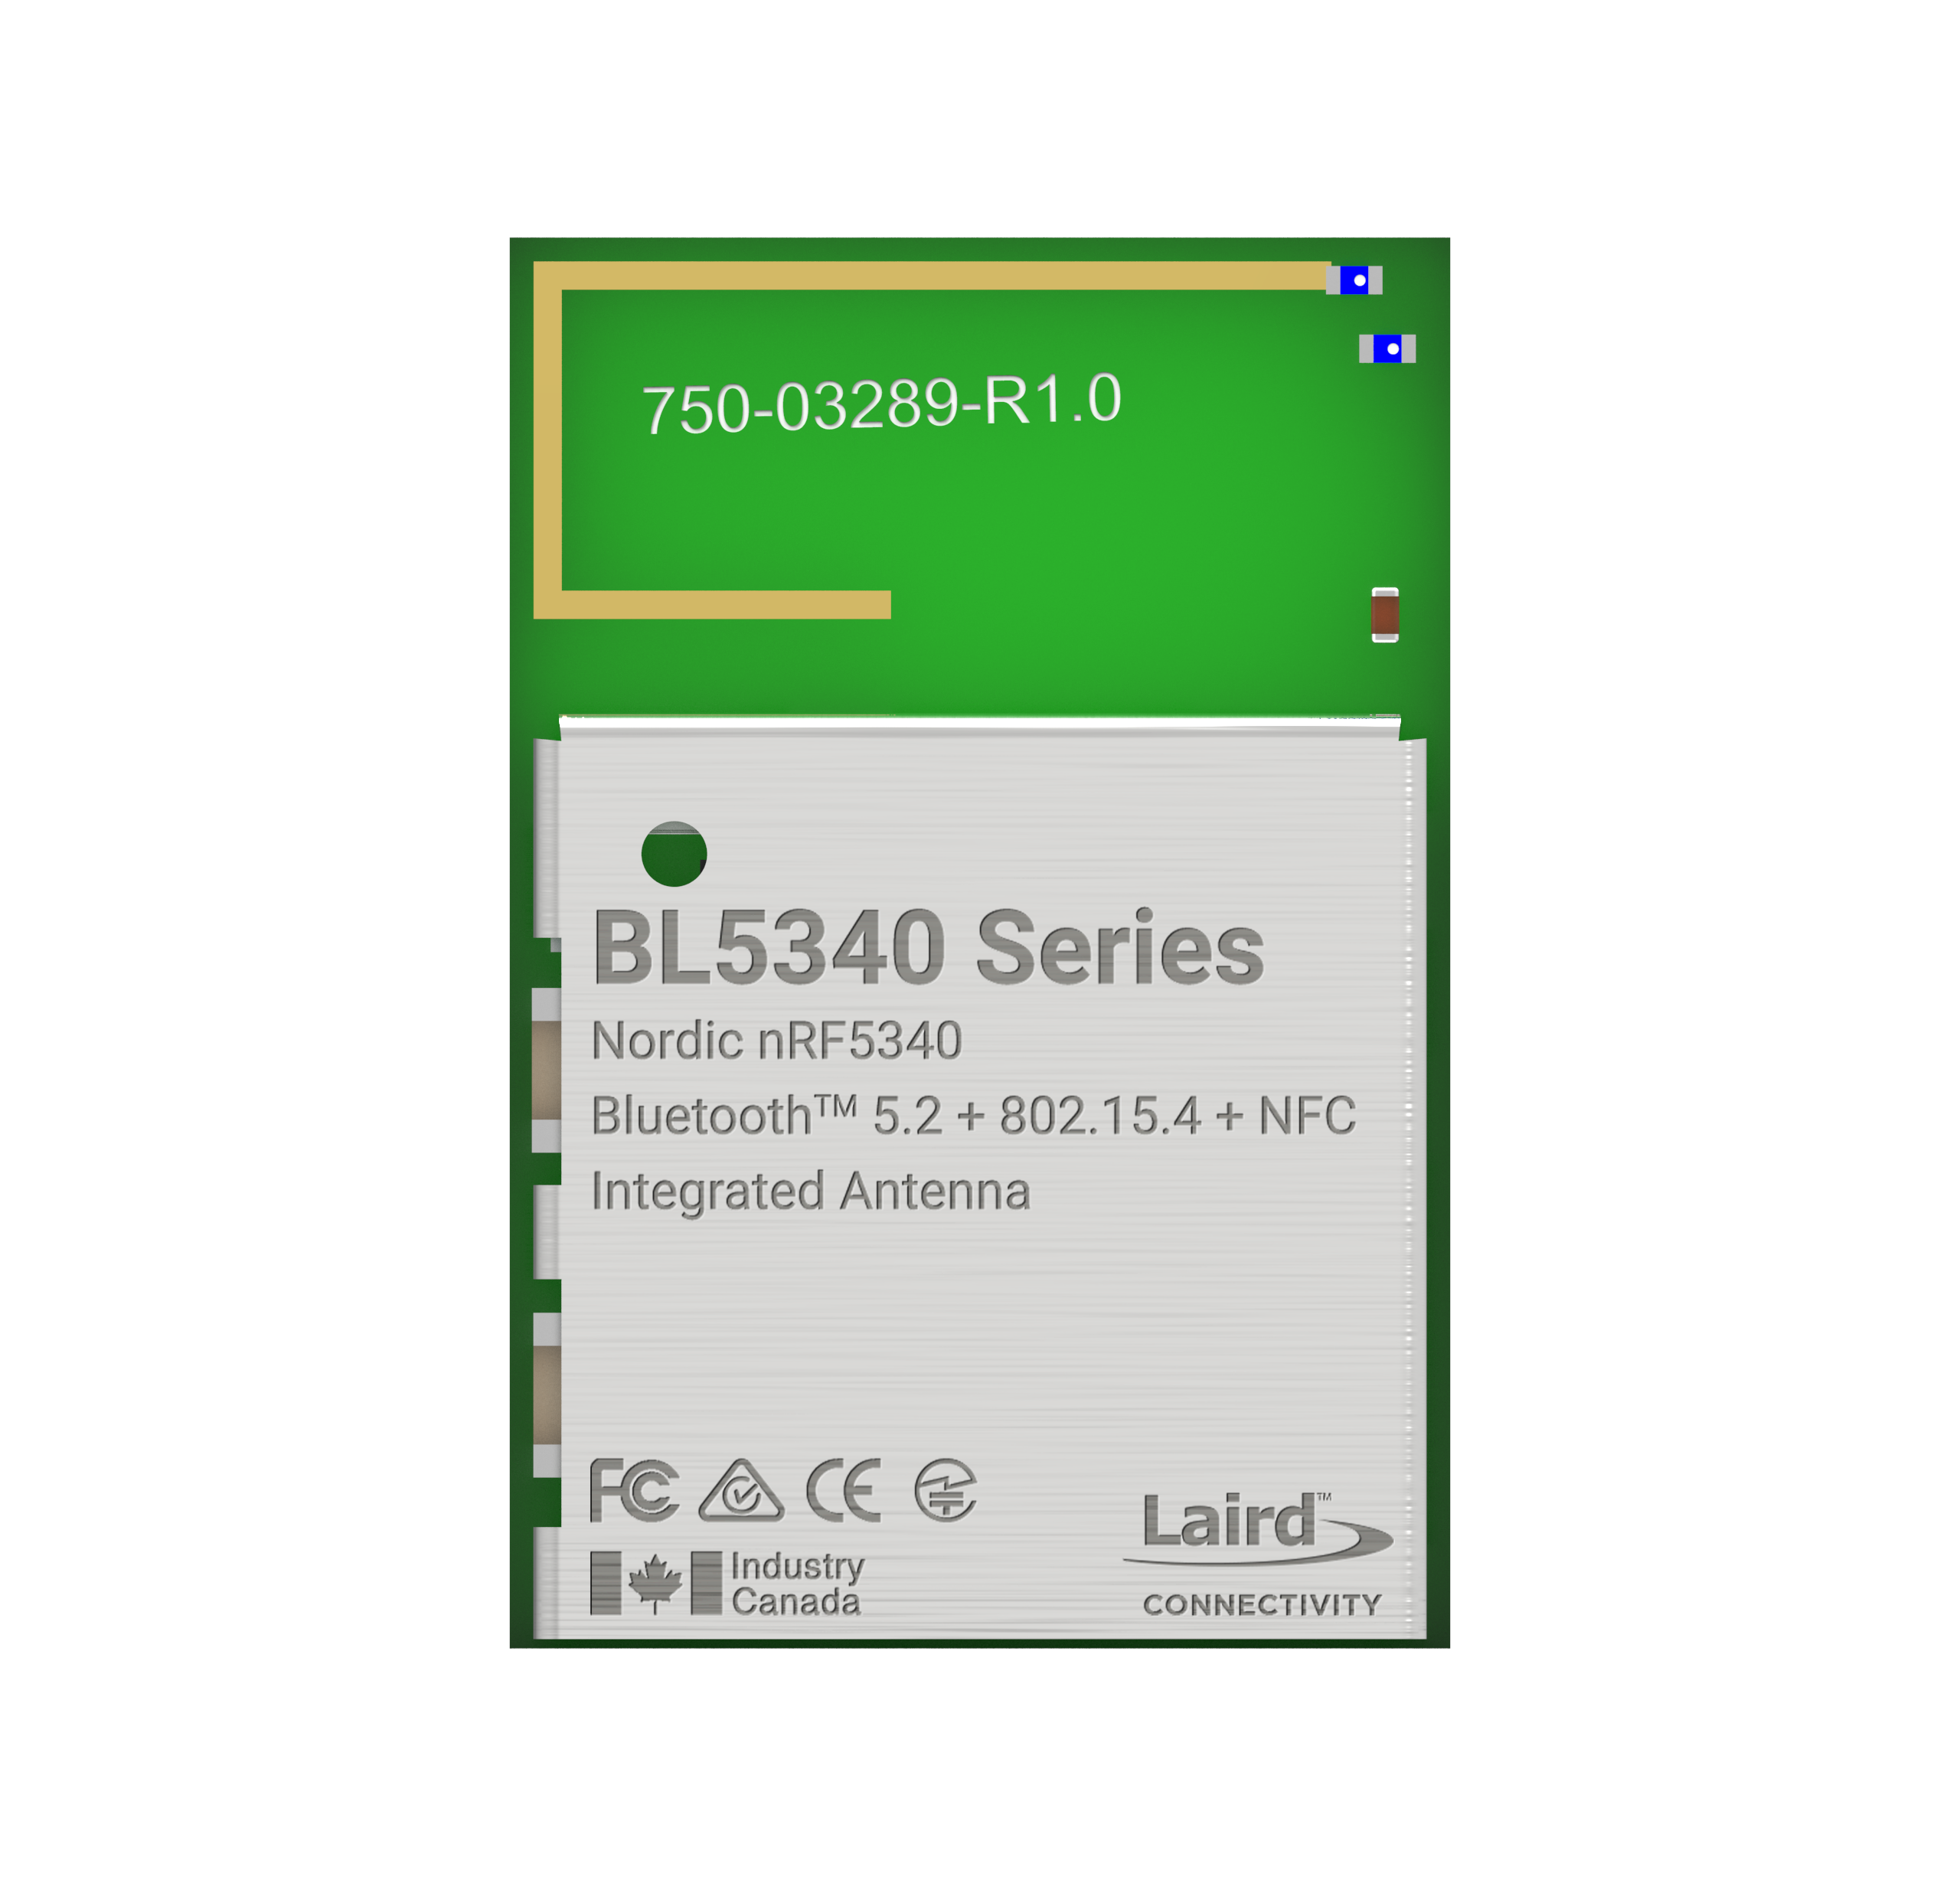 Laird Connectivity Development Kit for BL5340 Multi-Core / Protocol - Bluetooth and 802.15.4 and NFC Module Nordic